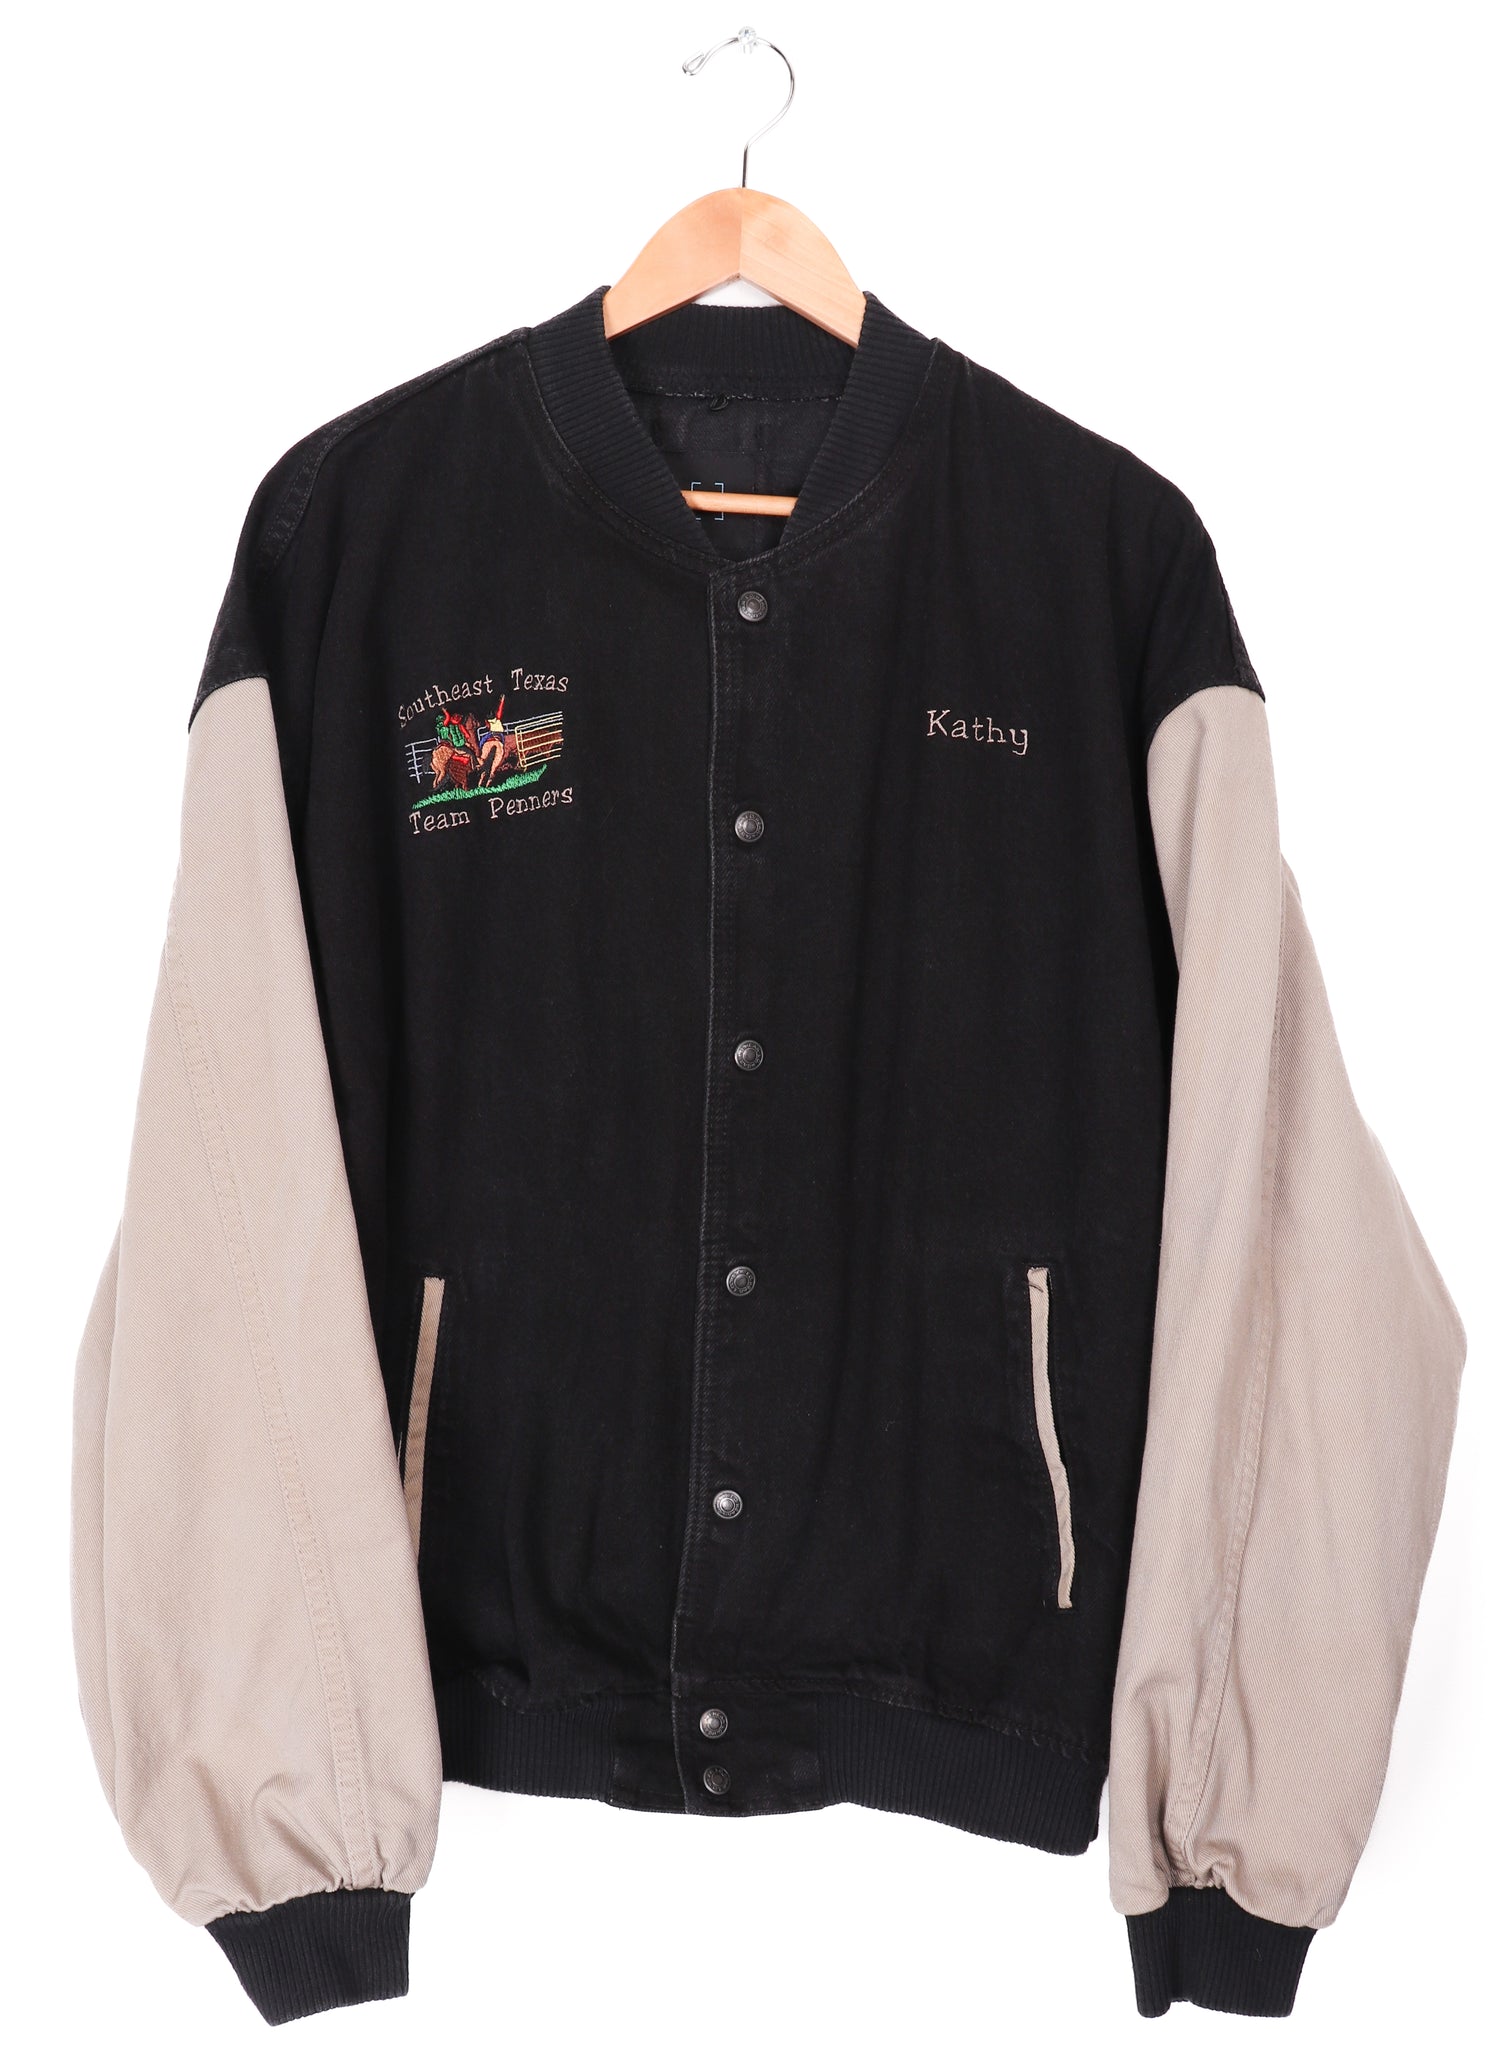 Southeast Texas Team Penners Kathy's Bomber Jacket